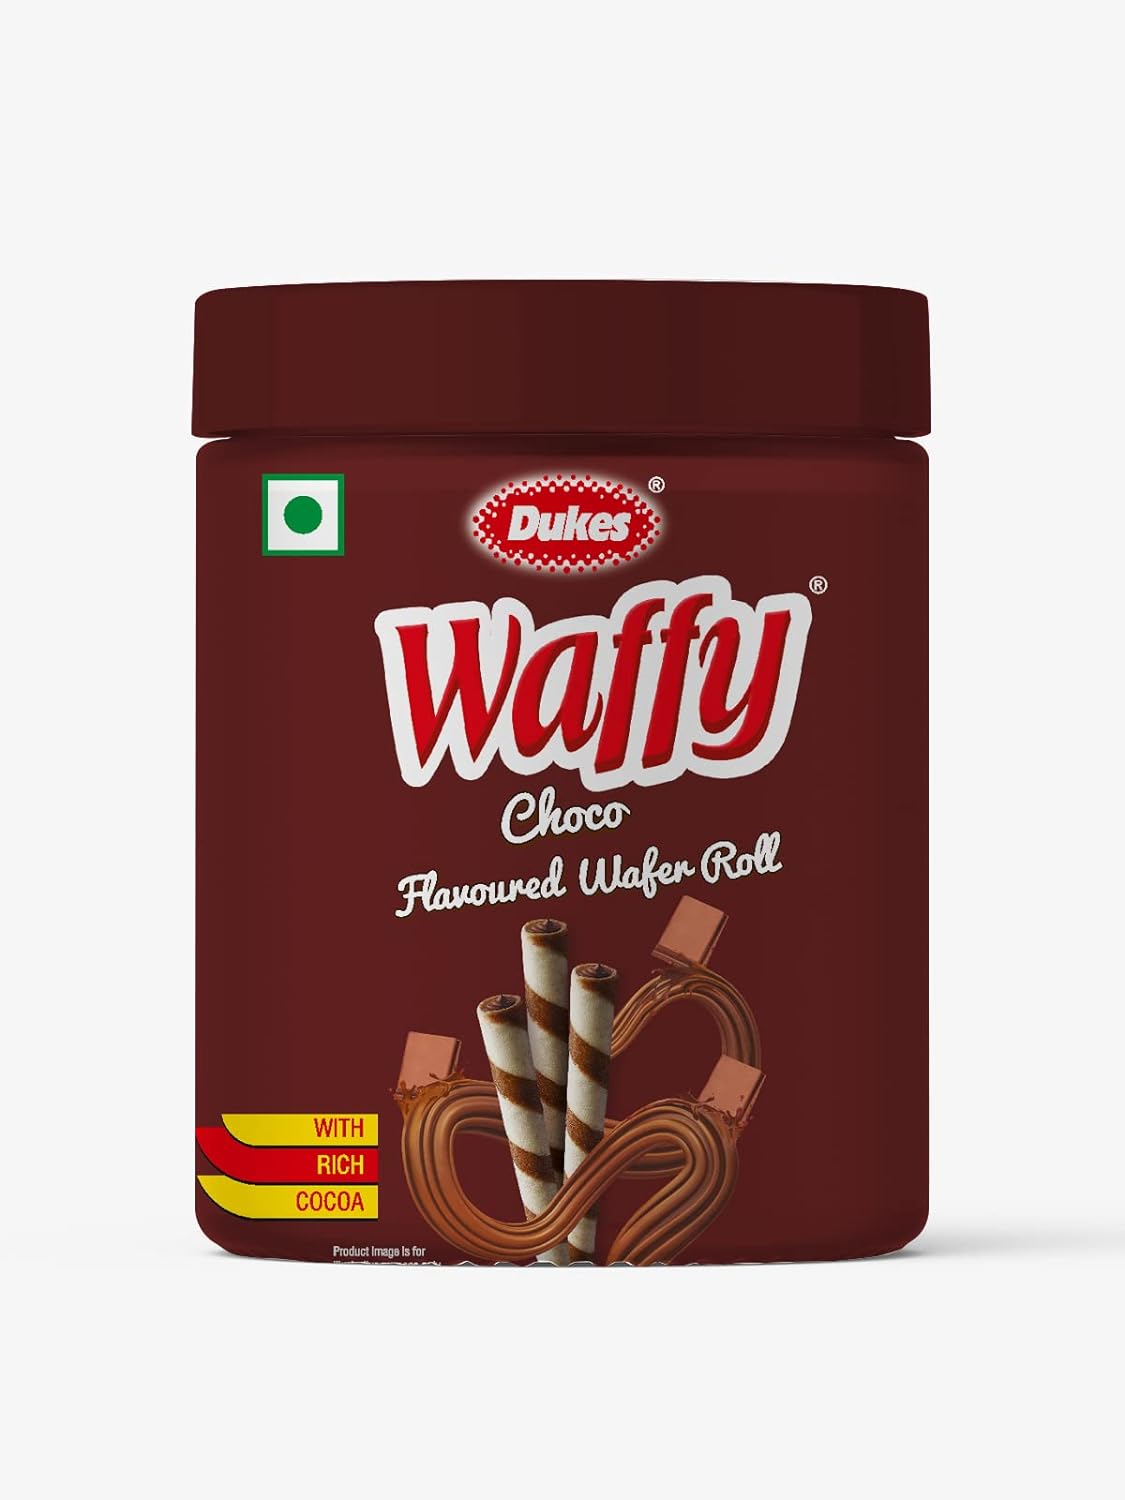 Dukes/ Waffy/ Choco Flavoured Wafer Roll (250gm)